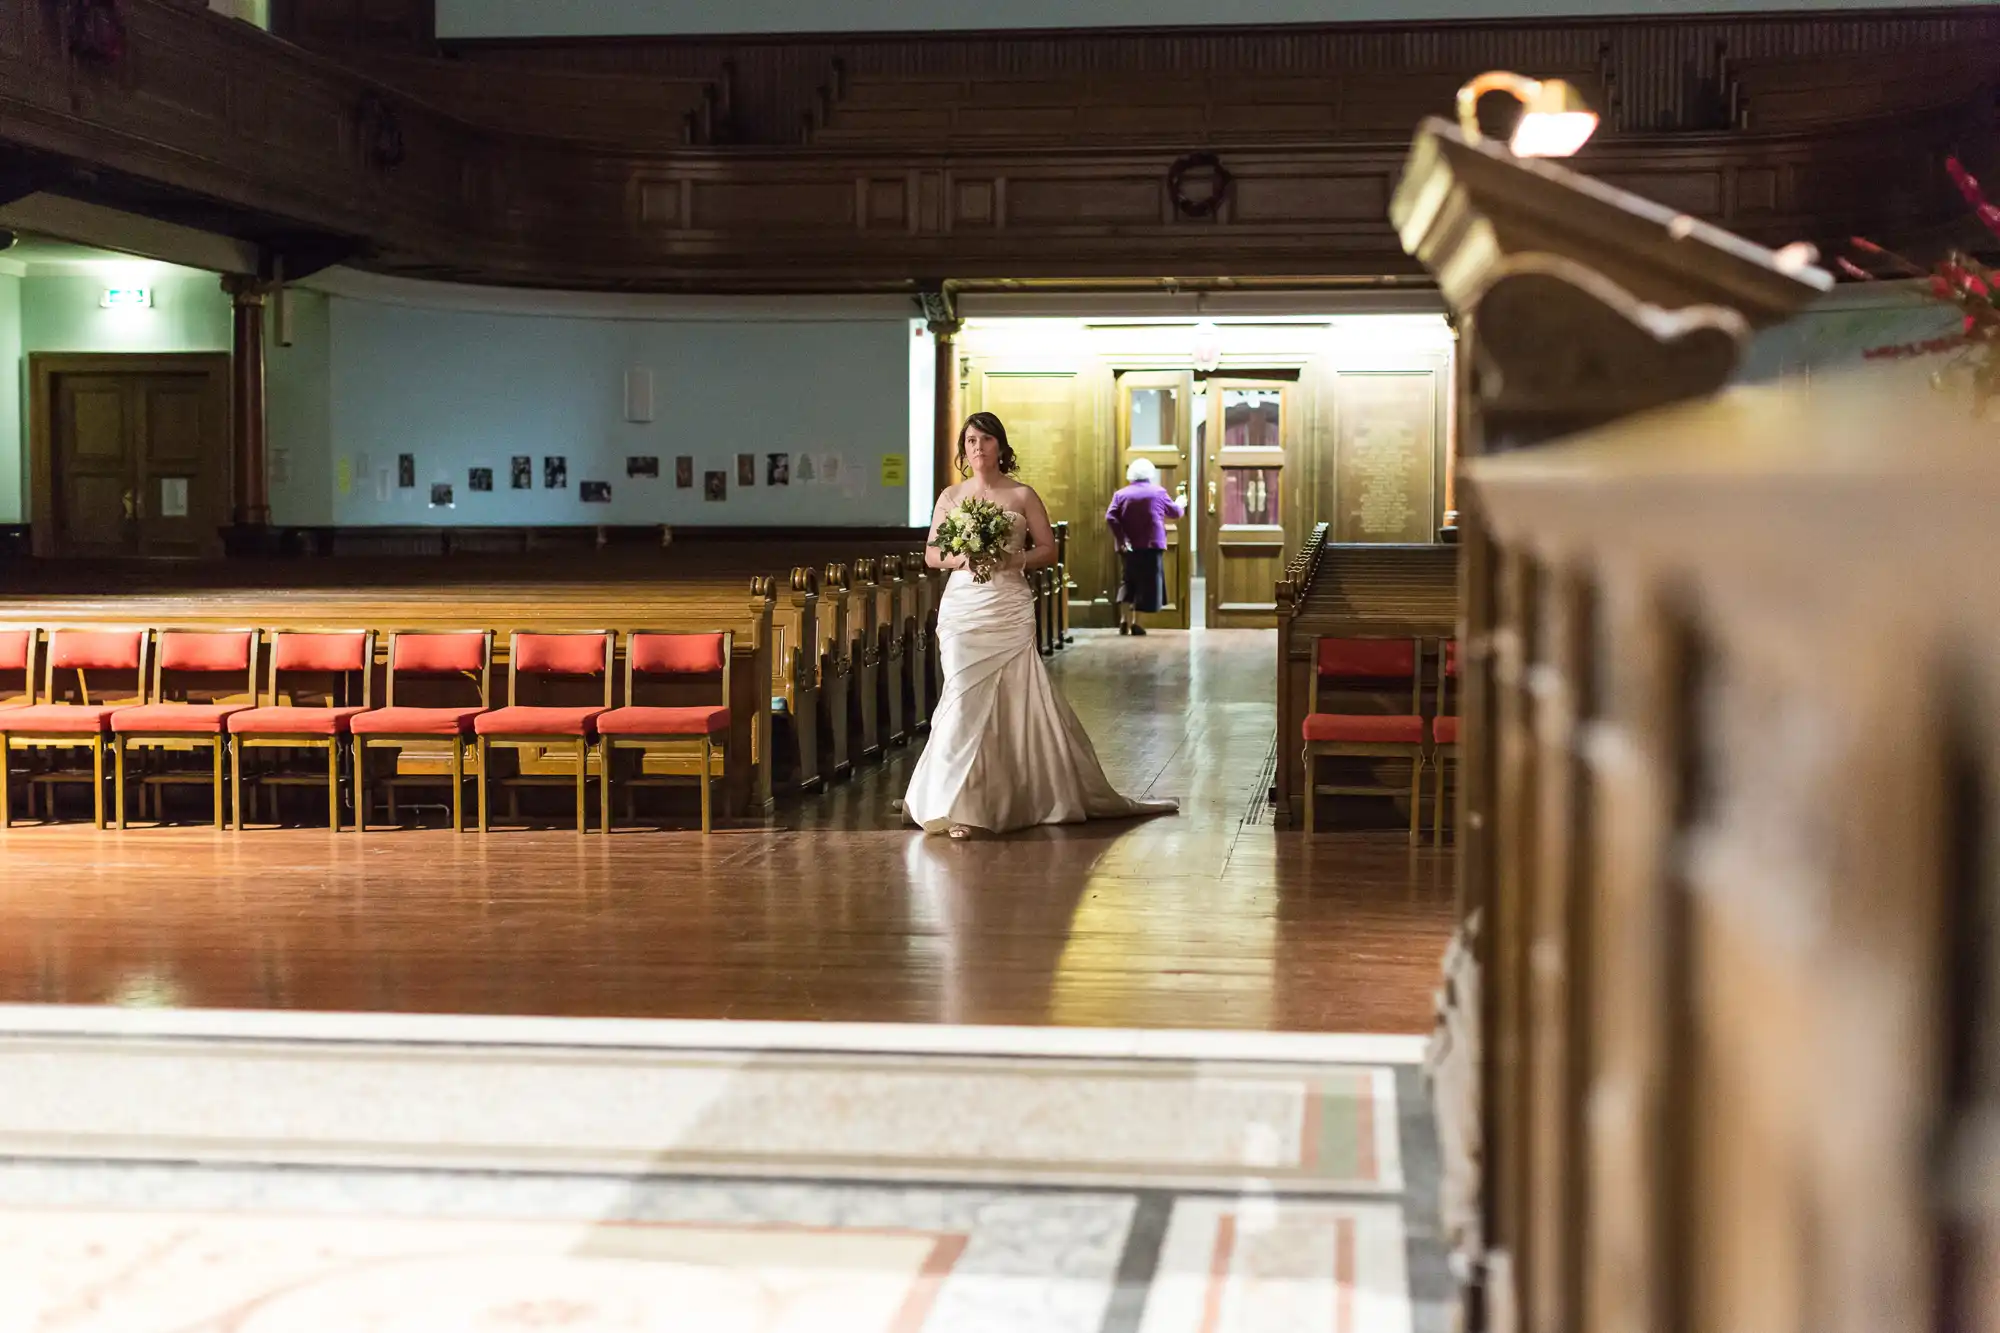 A bride in a white gown holding a bouquet walks down the aisle of an old hall with wooden chairs lined up along the sides.